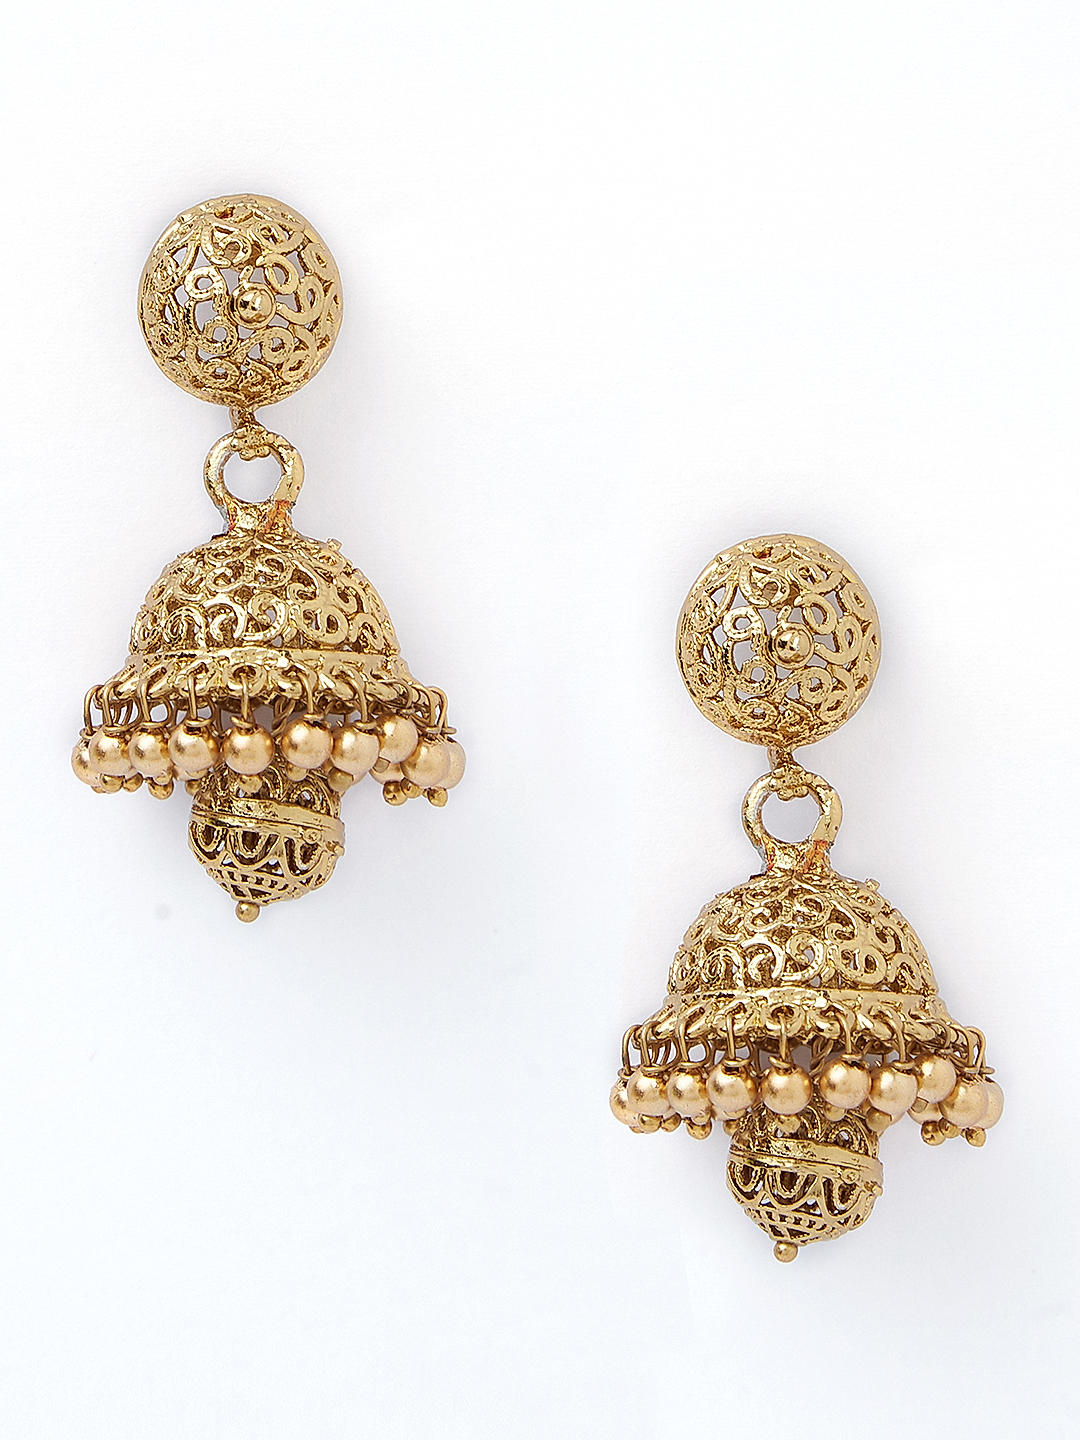 Ethinic South Indian Traditional Gold Jhumka Earring For Women